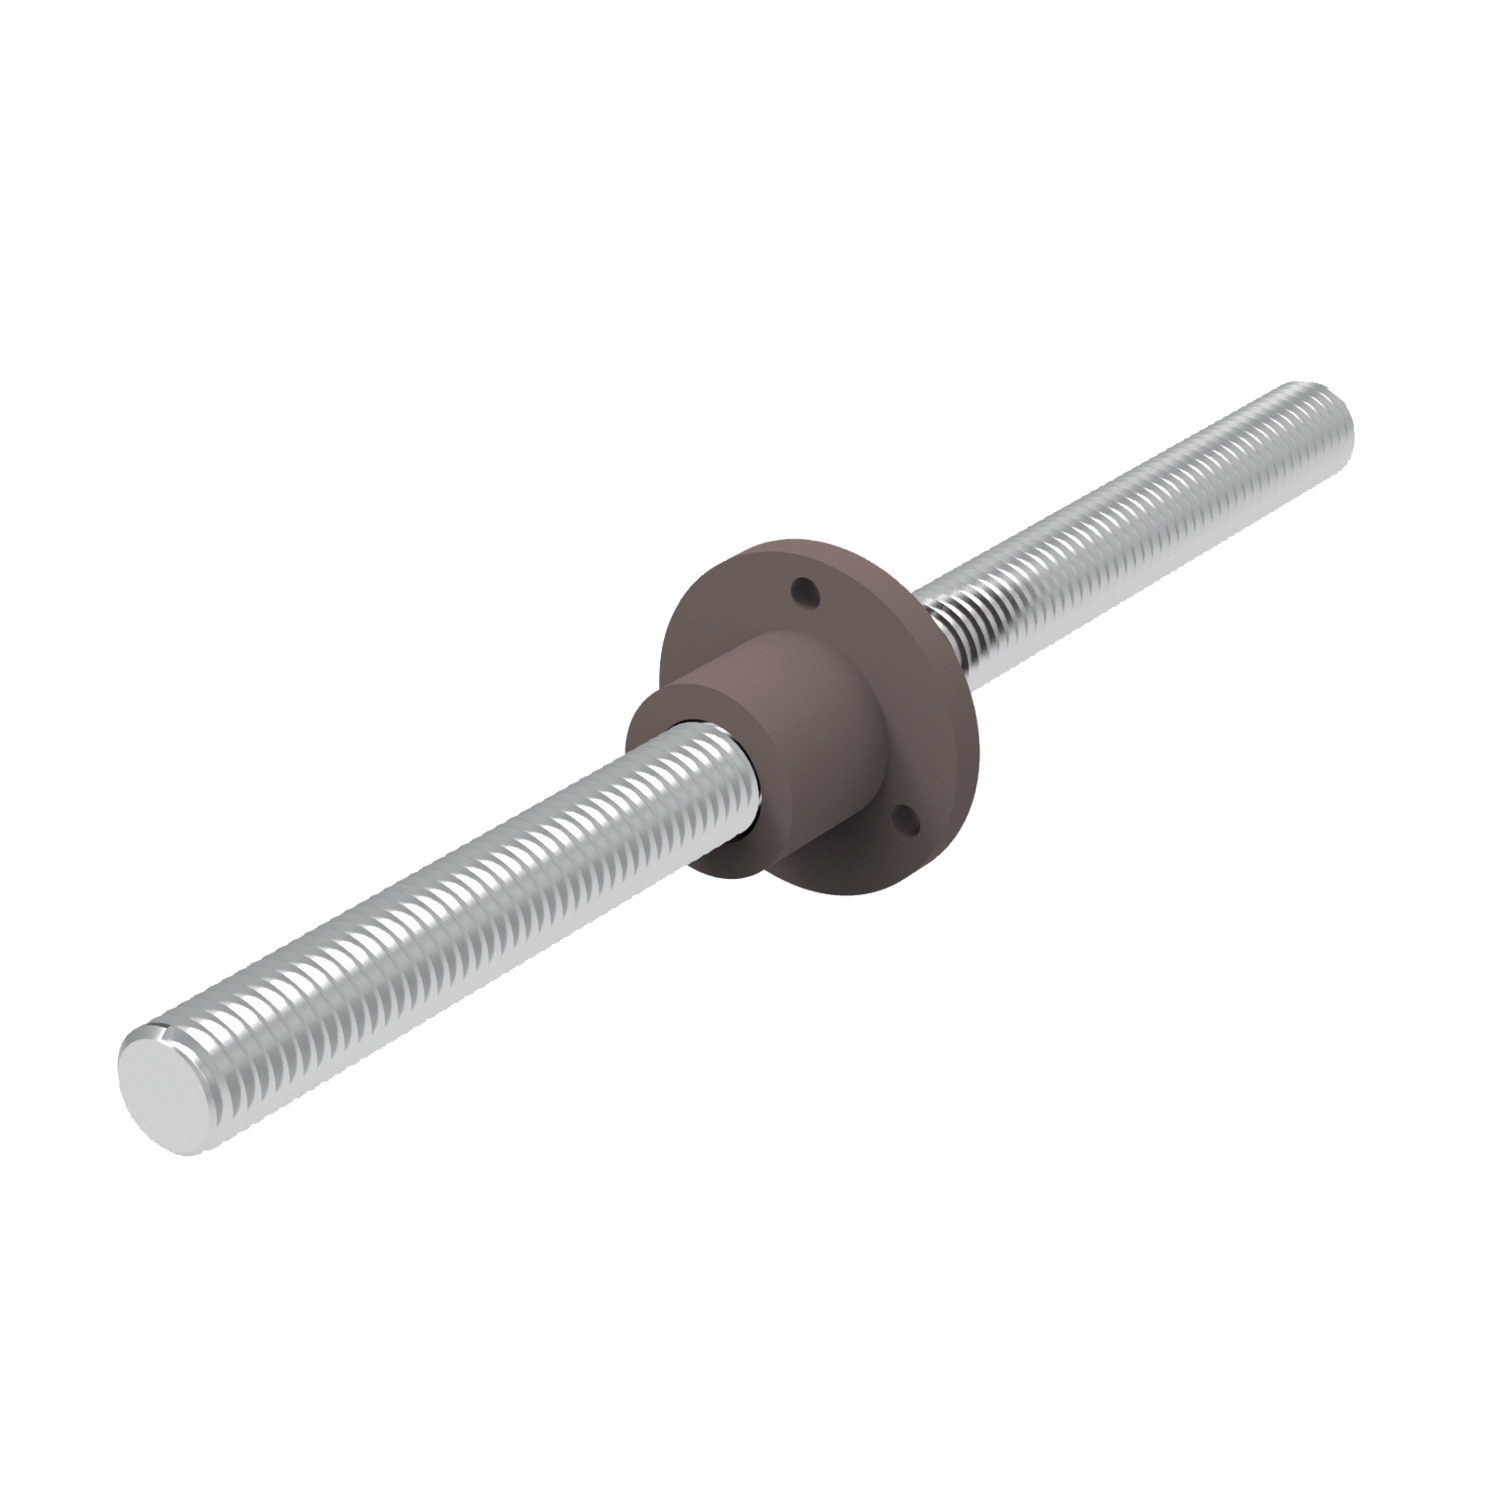 Anti-backlash High Helix Lead Screws Anodized aluminium or 416 stainless steel screw with round acetal resin nut. High precision. Nut fitted to screw to ensure anti-backlash.